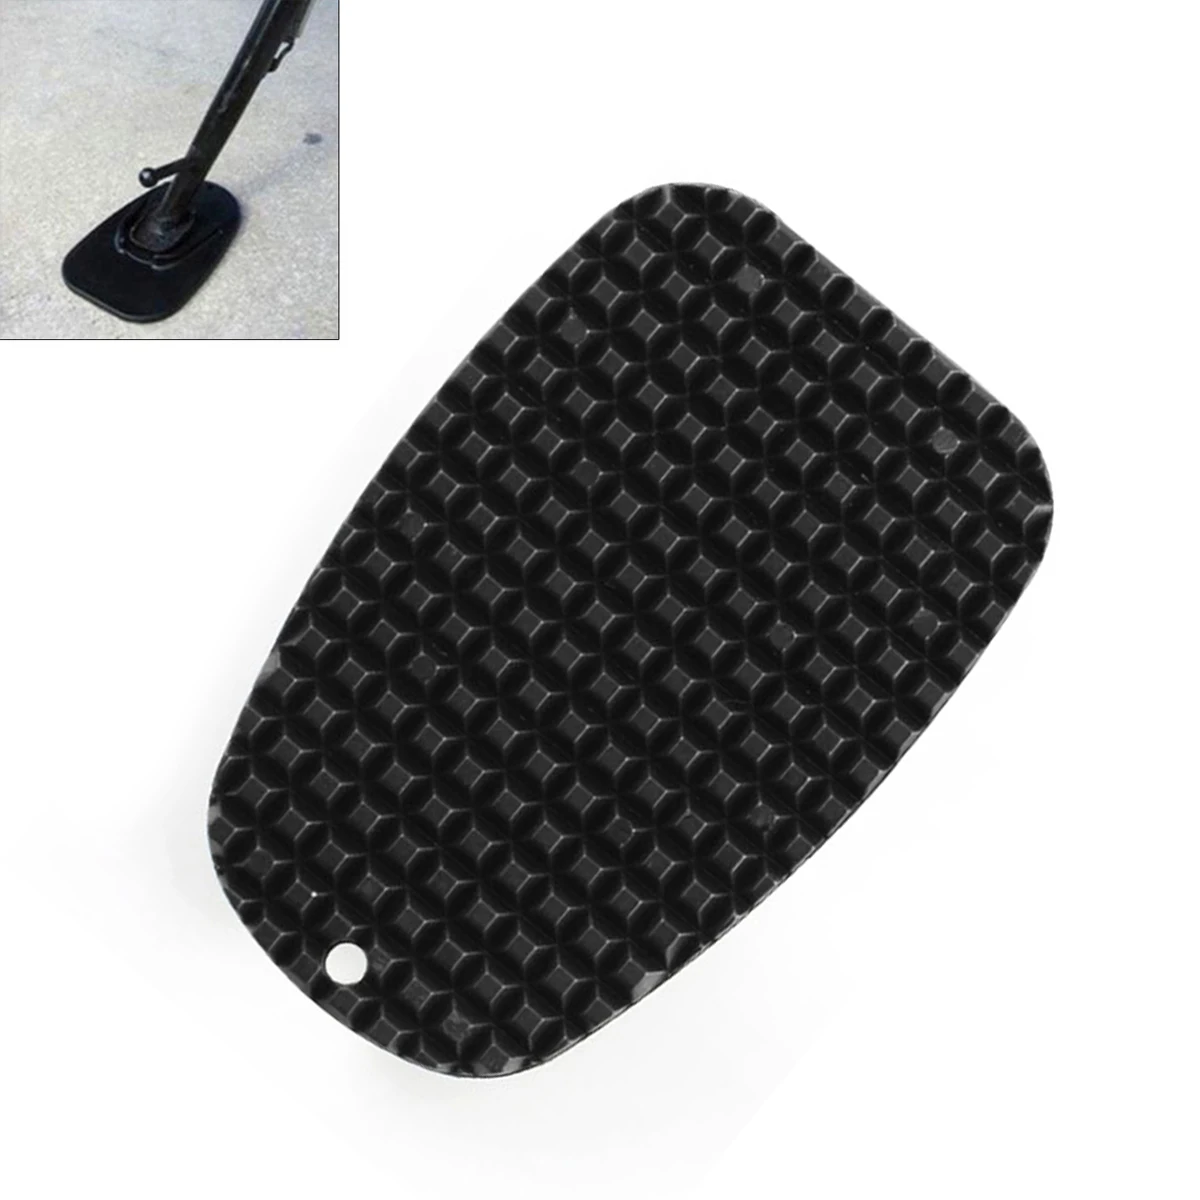 Купи Motorcycle Kickstand Foot Side Stand Extension Pad Support Plate for Motorbike Snow Slippery Road Hot Road Grass Sand Support за 183 рублей в магазине AliExpress